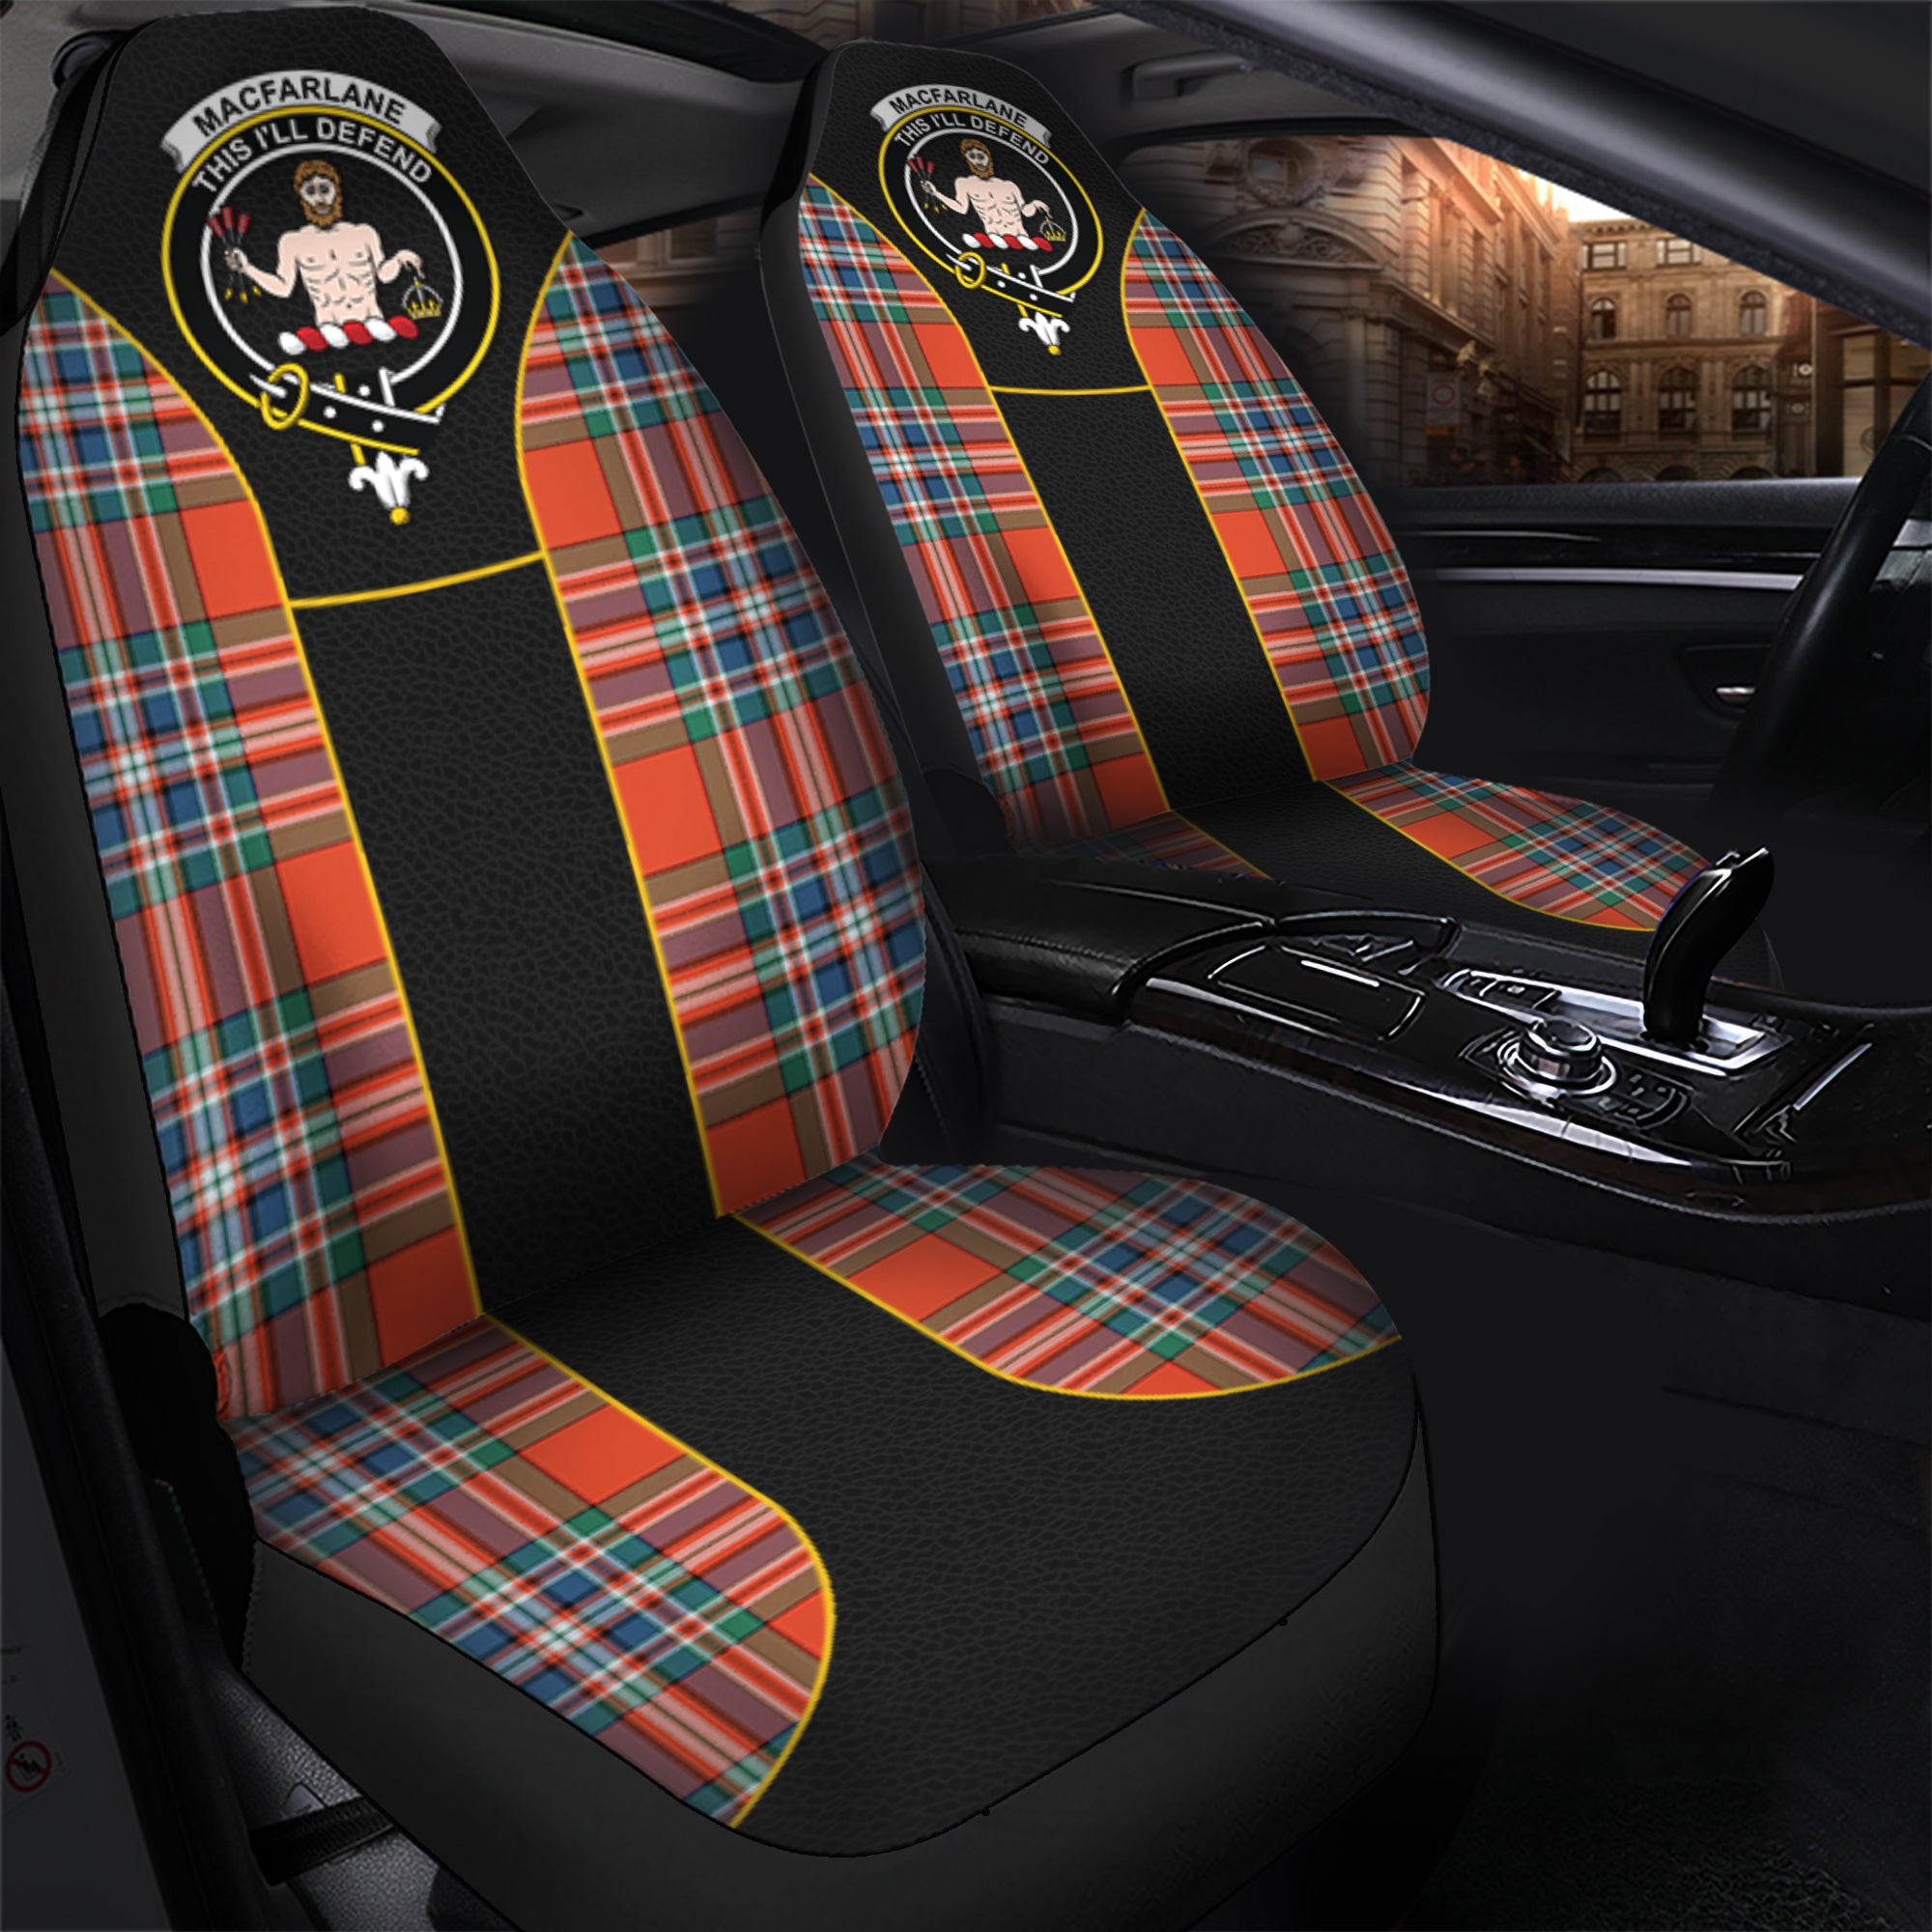 scottish-macfarlane-ancient-tartan-crest-car-seat-cover-special-style